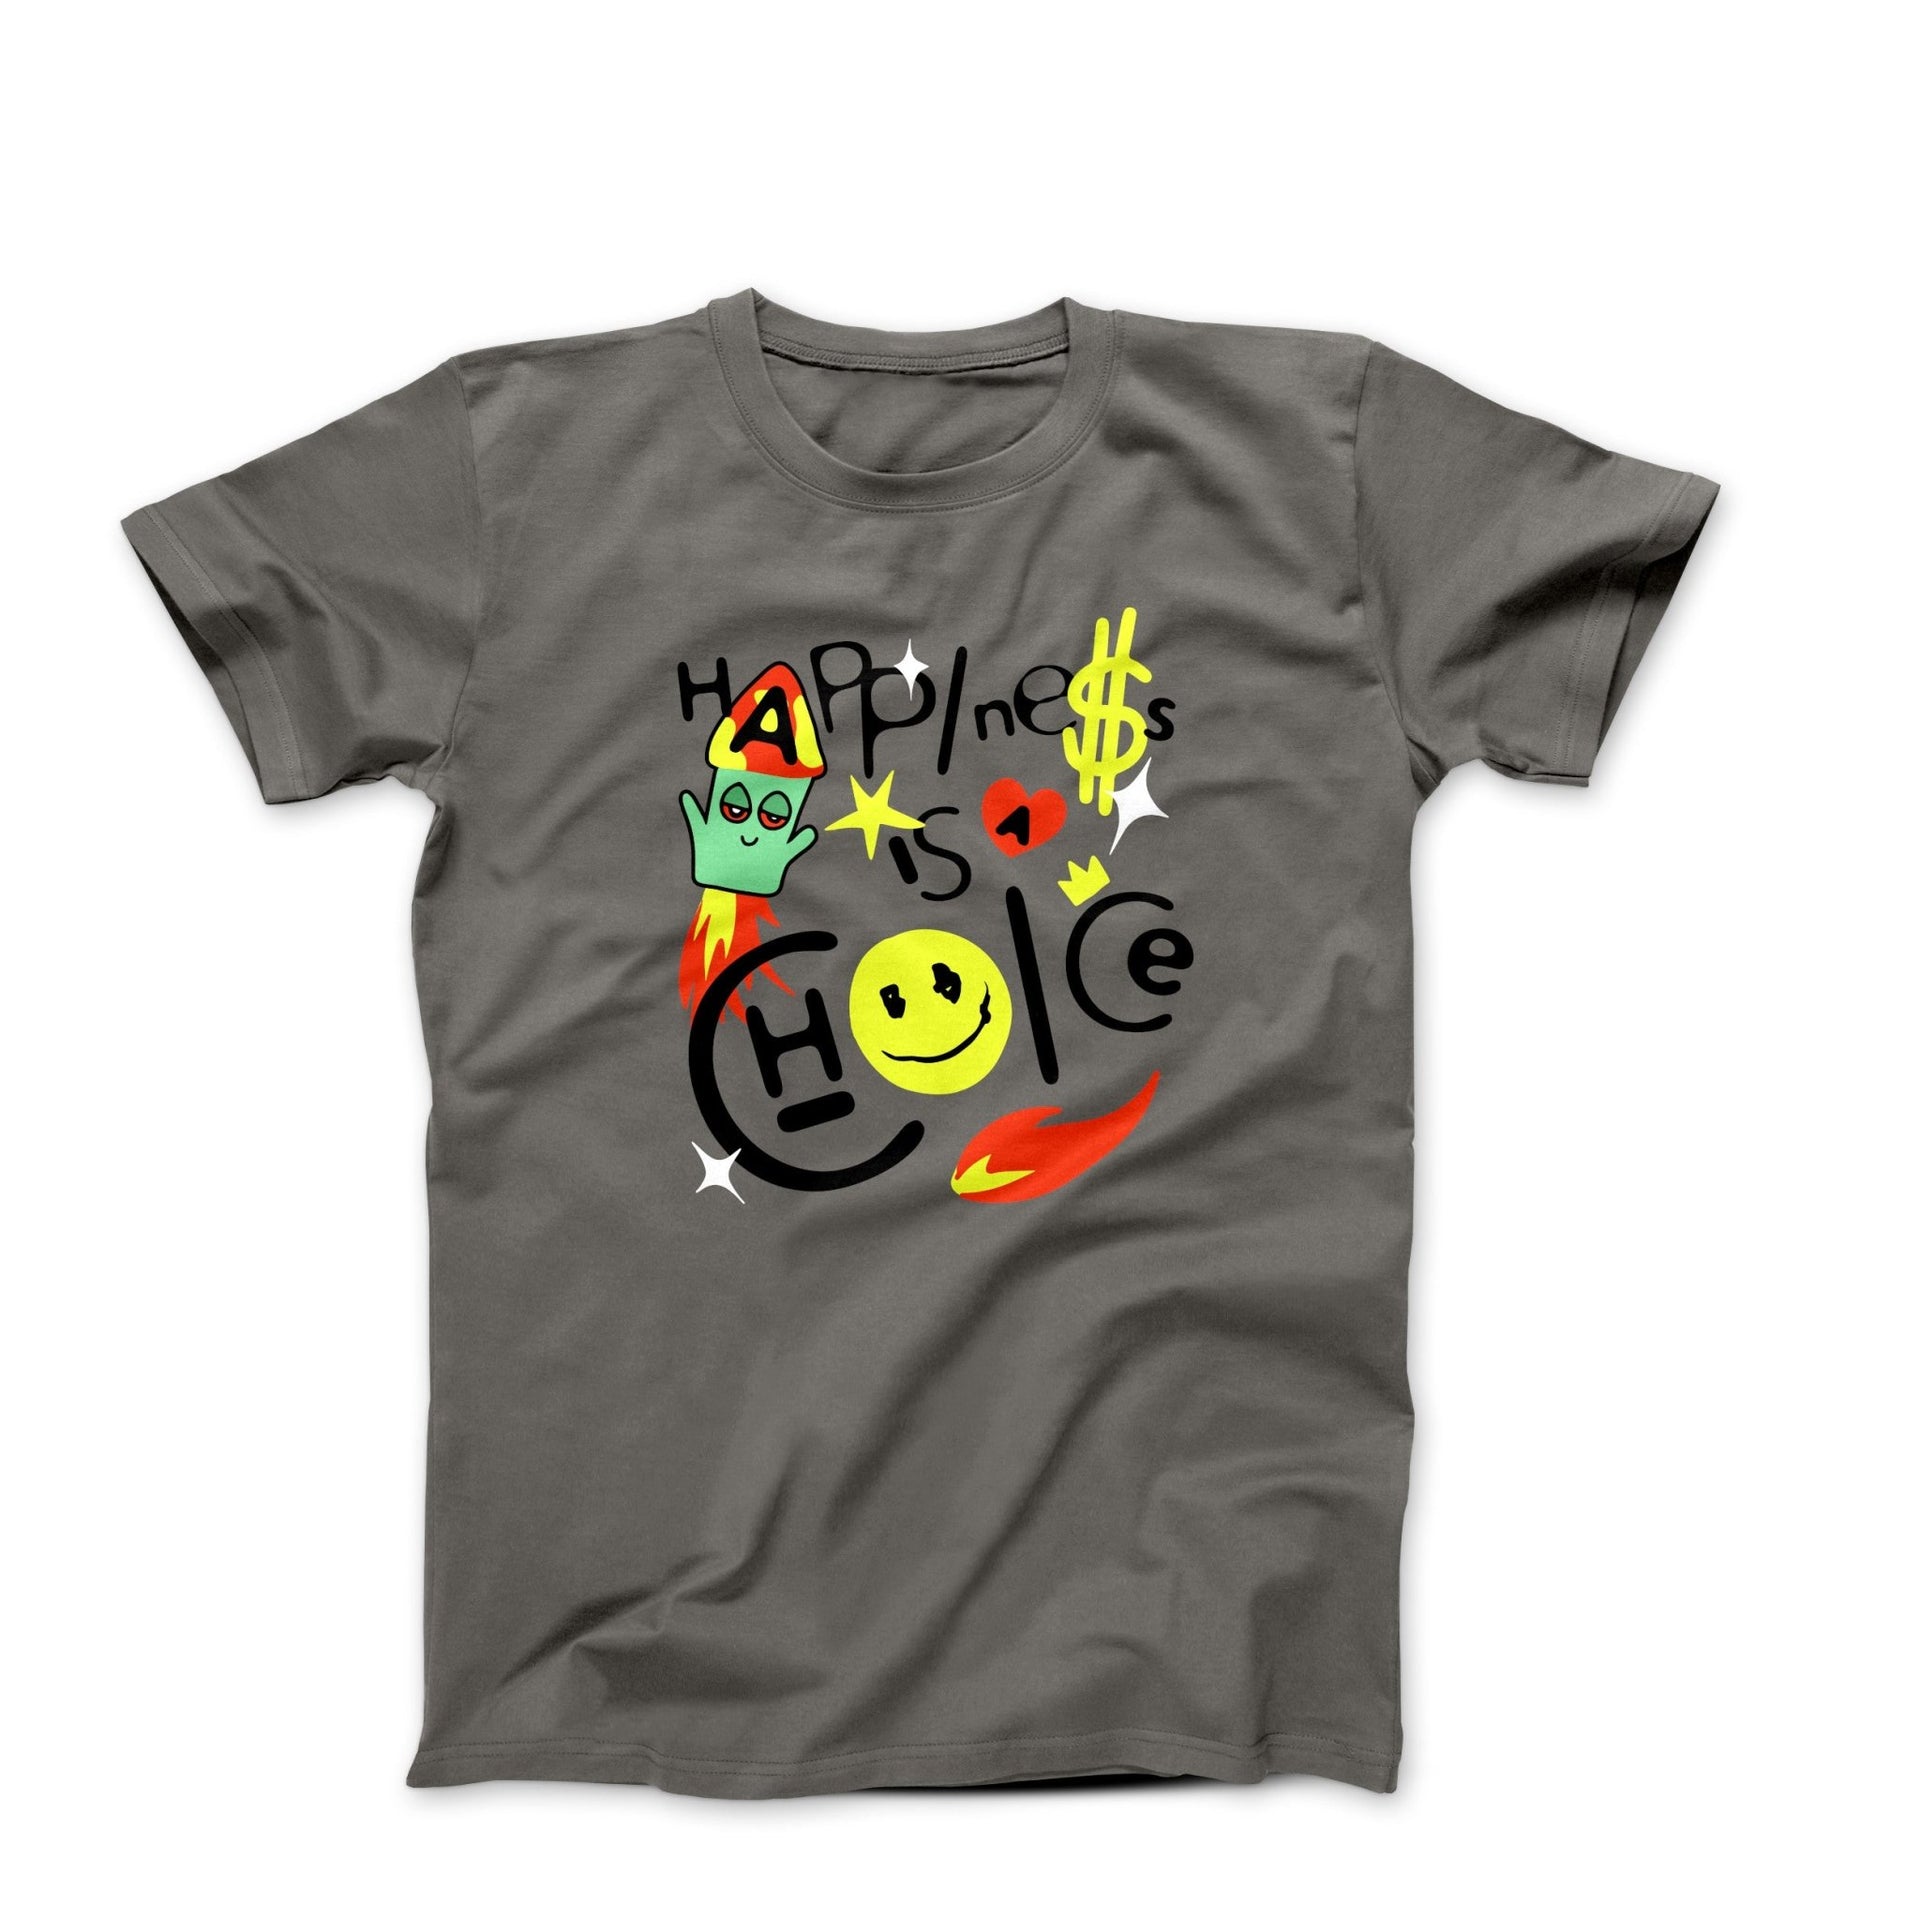 Happiness Is A Choice Graphic Art T-shirt - Clothing - Harvey Ltd